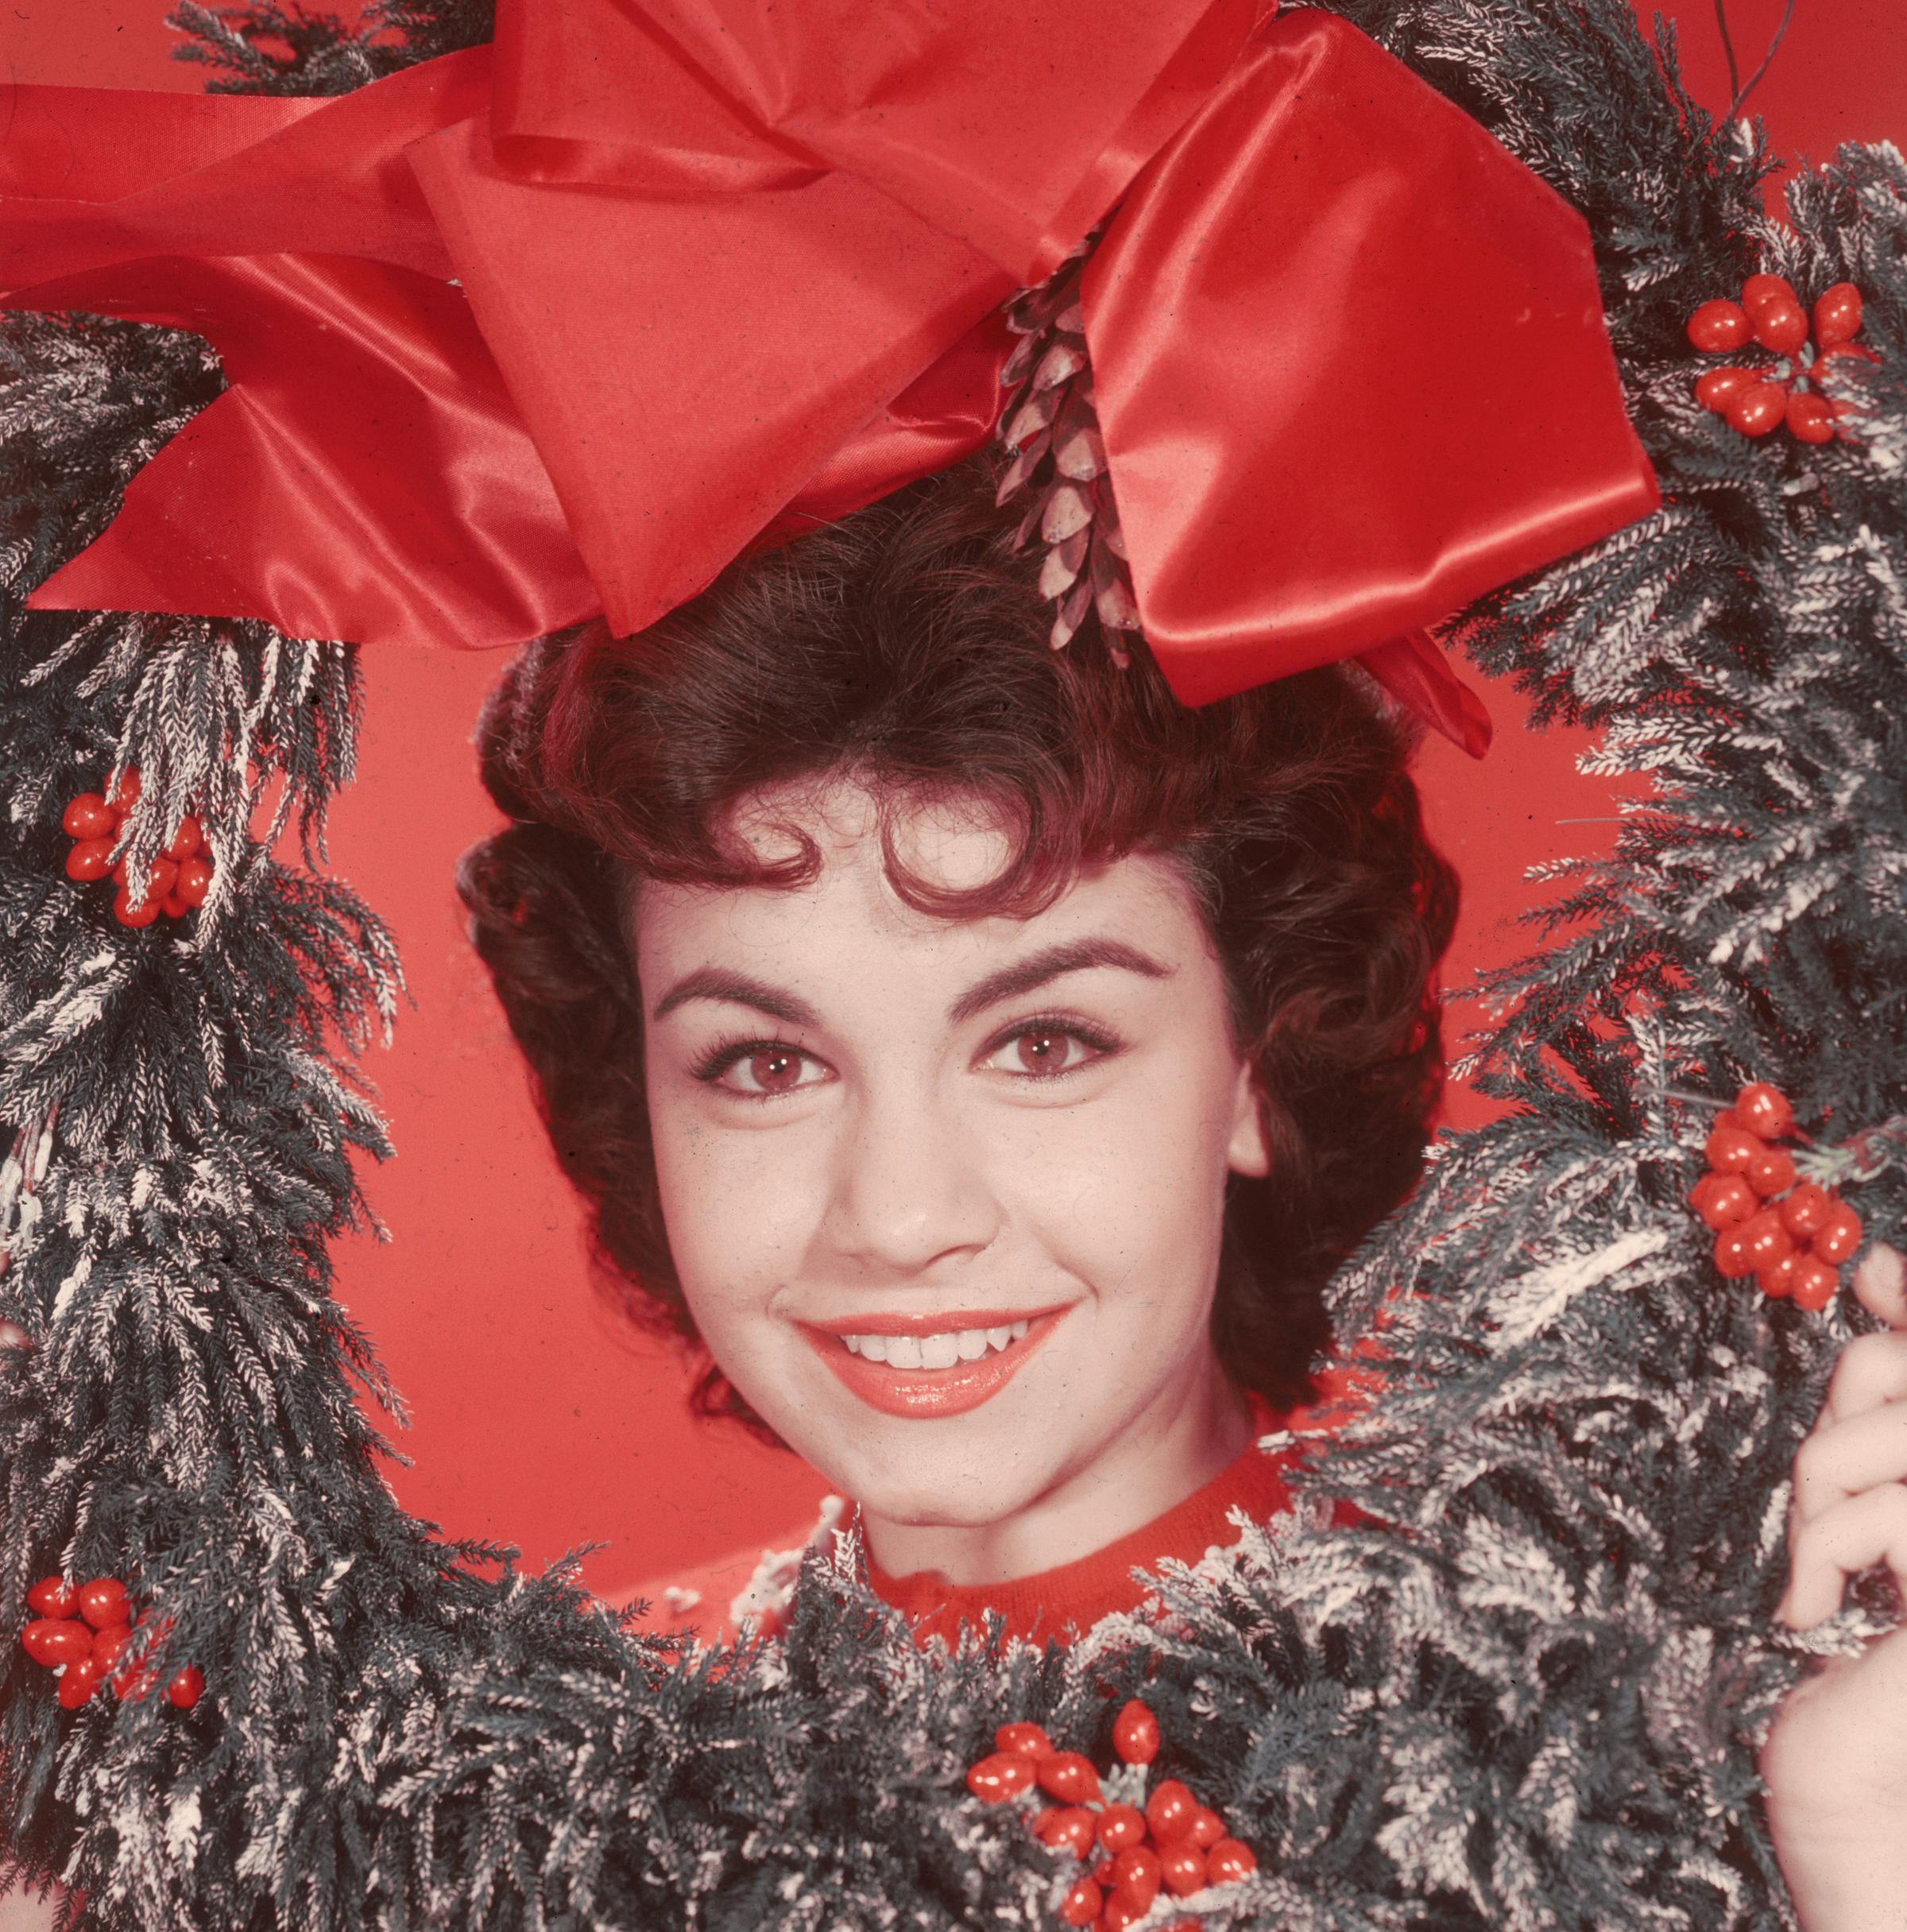 Annette pictures funicello of 